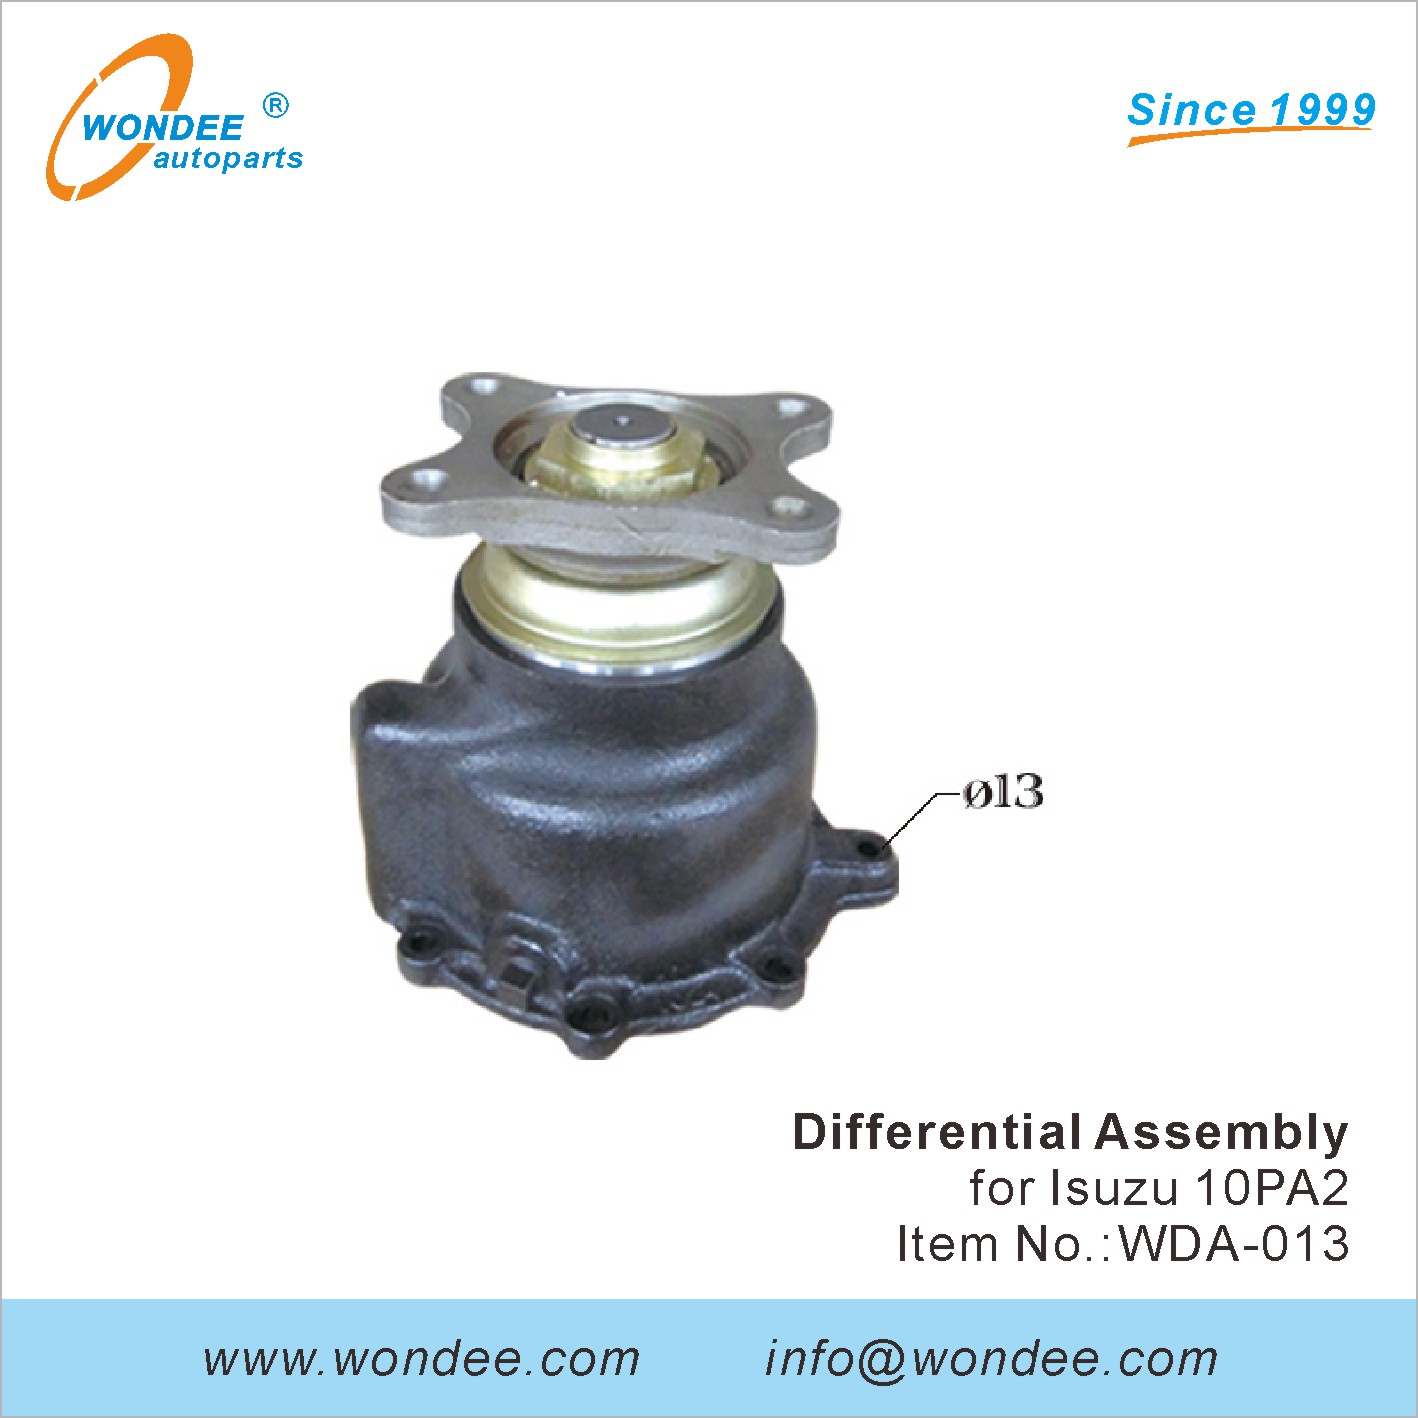 WONDEE differential assembly (13)